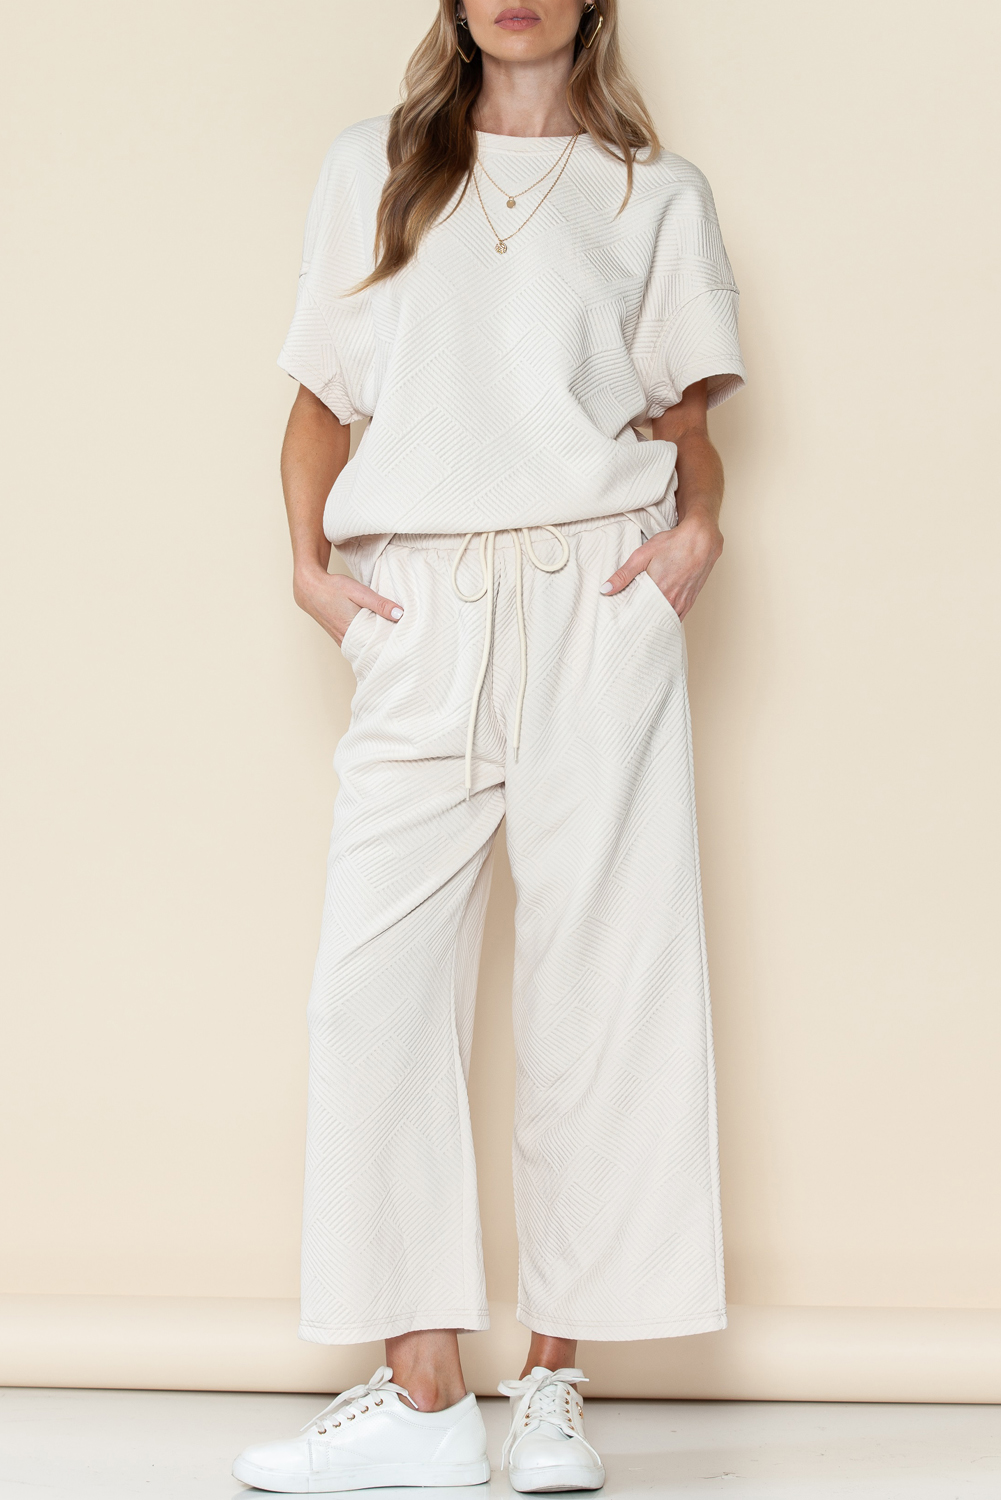 Bright White Textured Loose Fit T Shirt and Drawstring PANTS Set